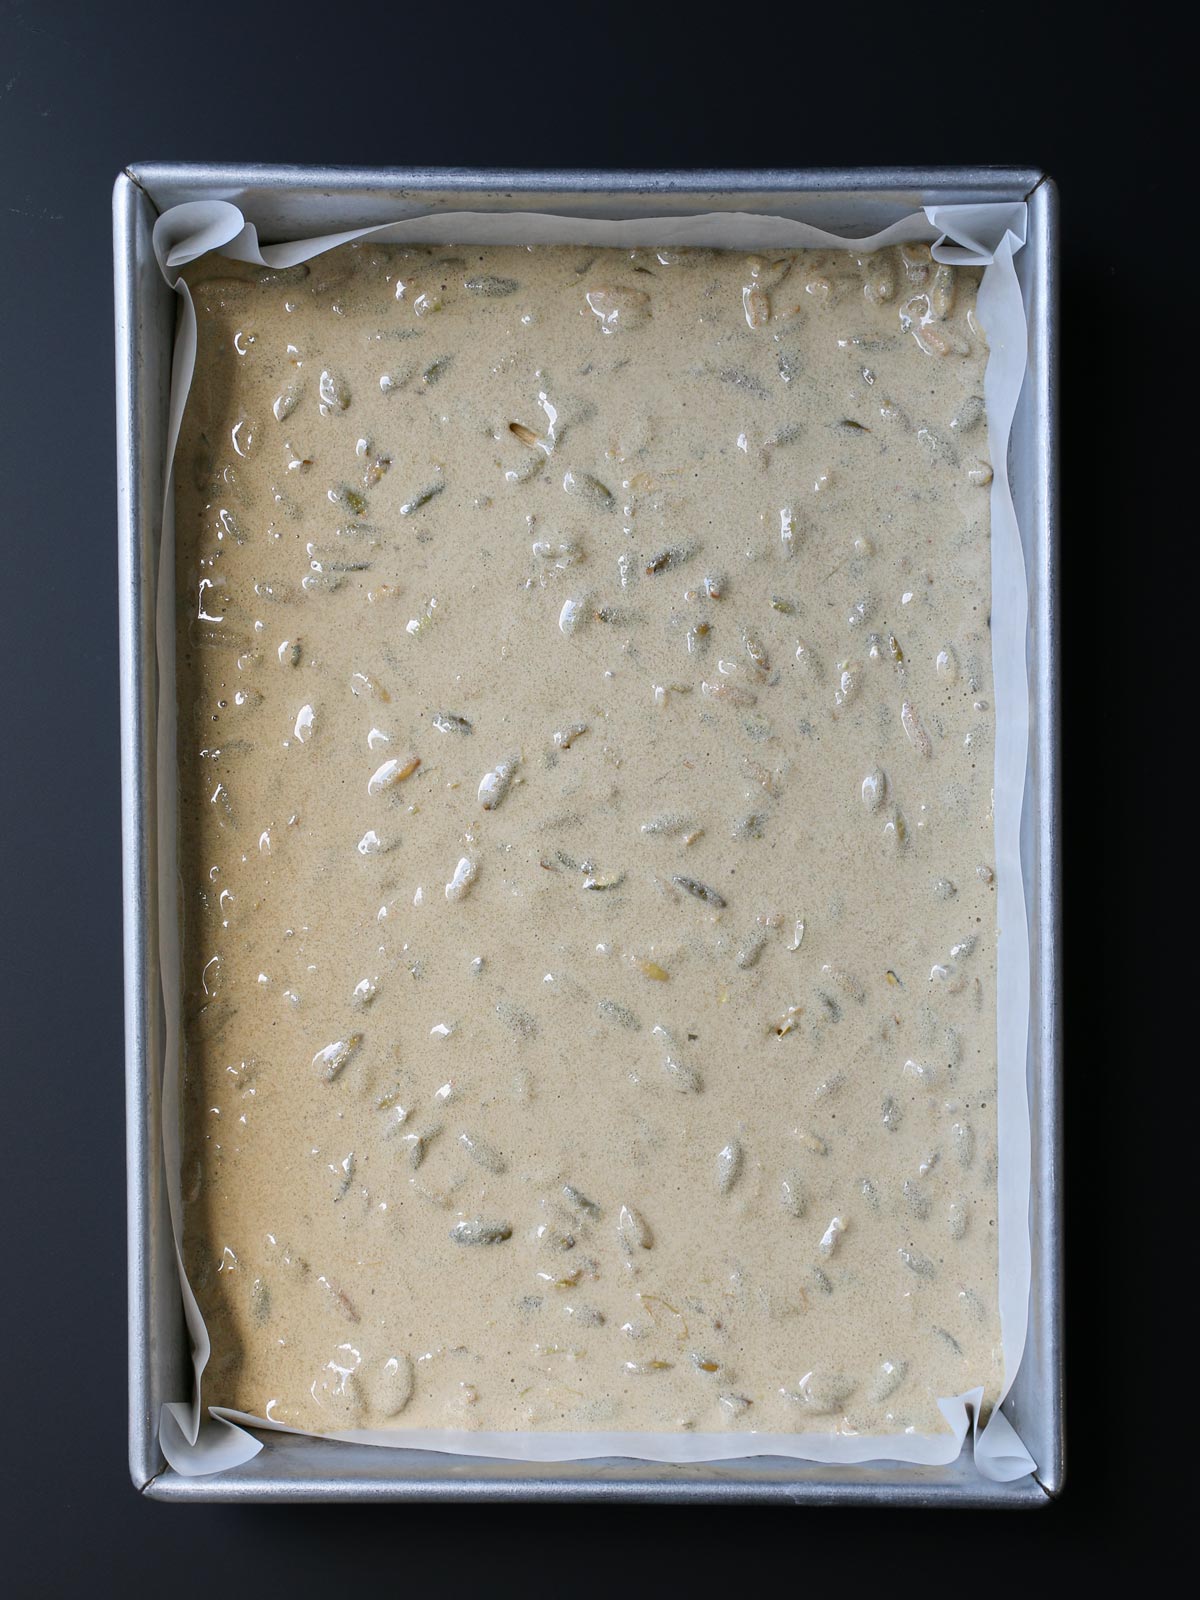 batter poured into lined pan.